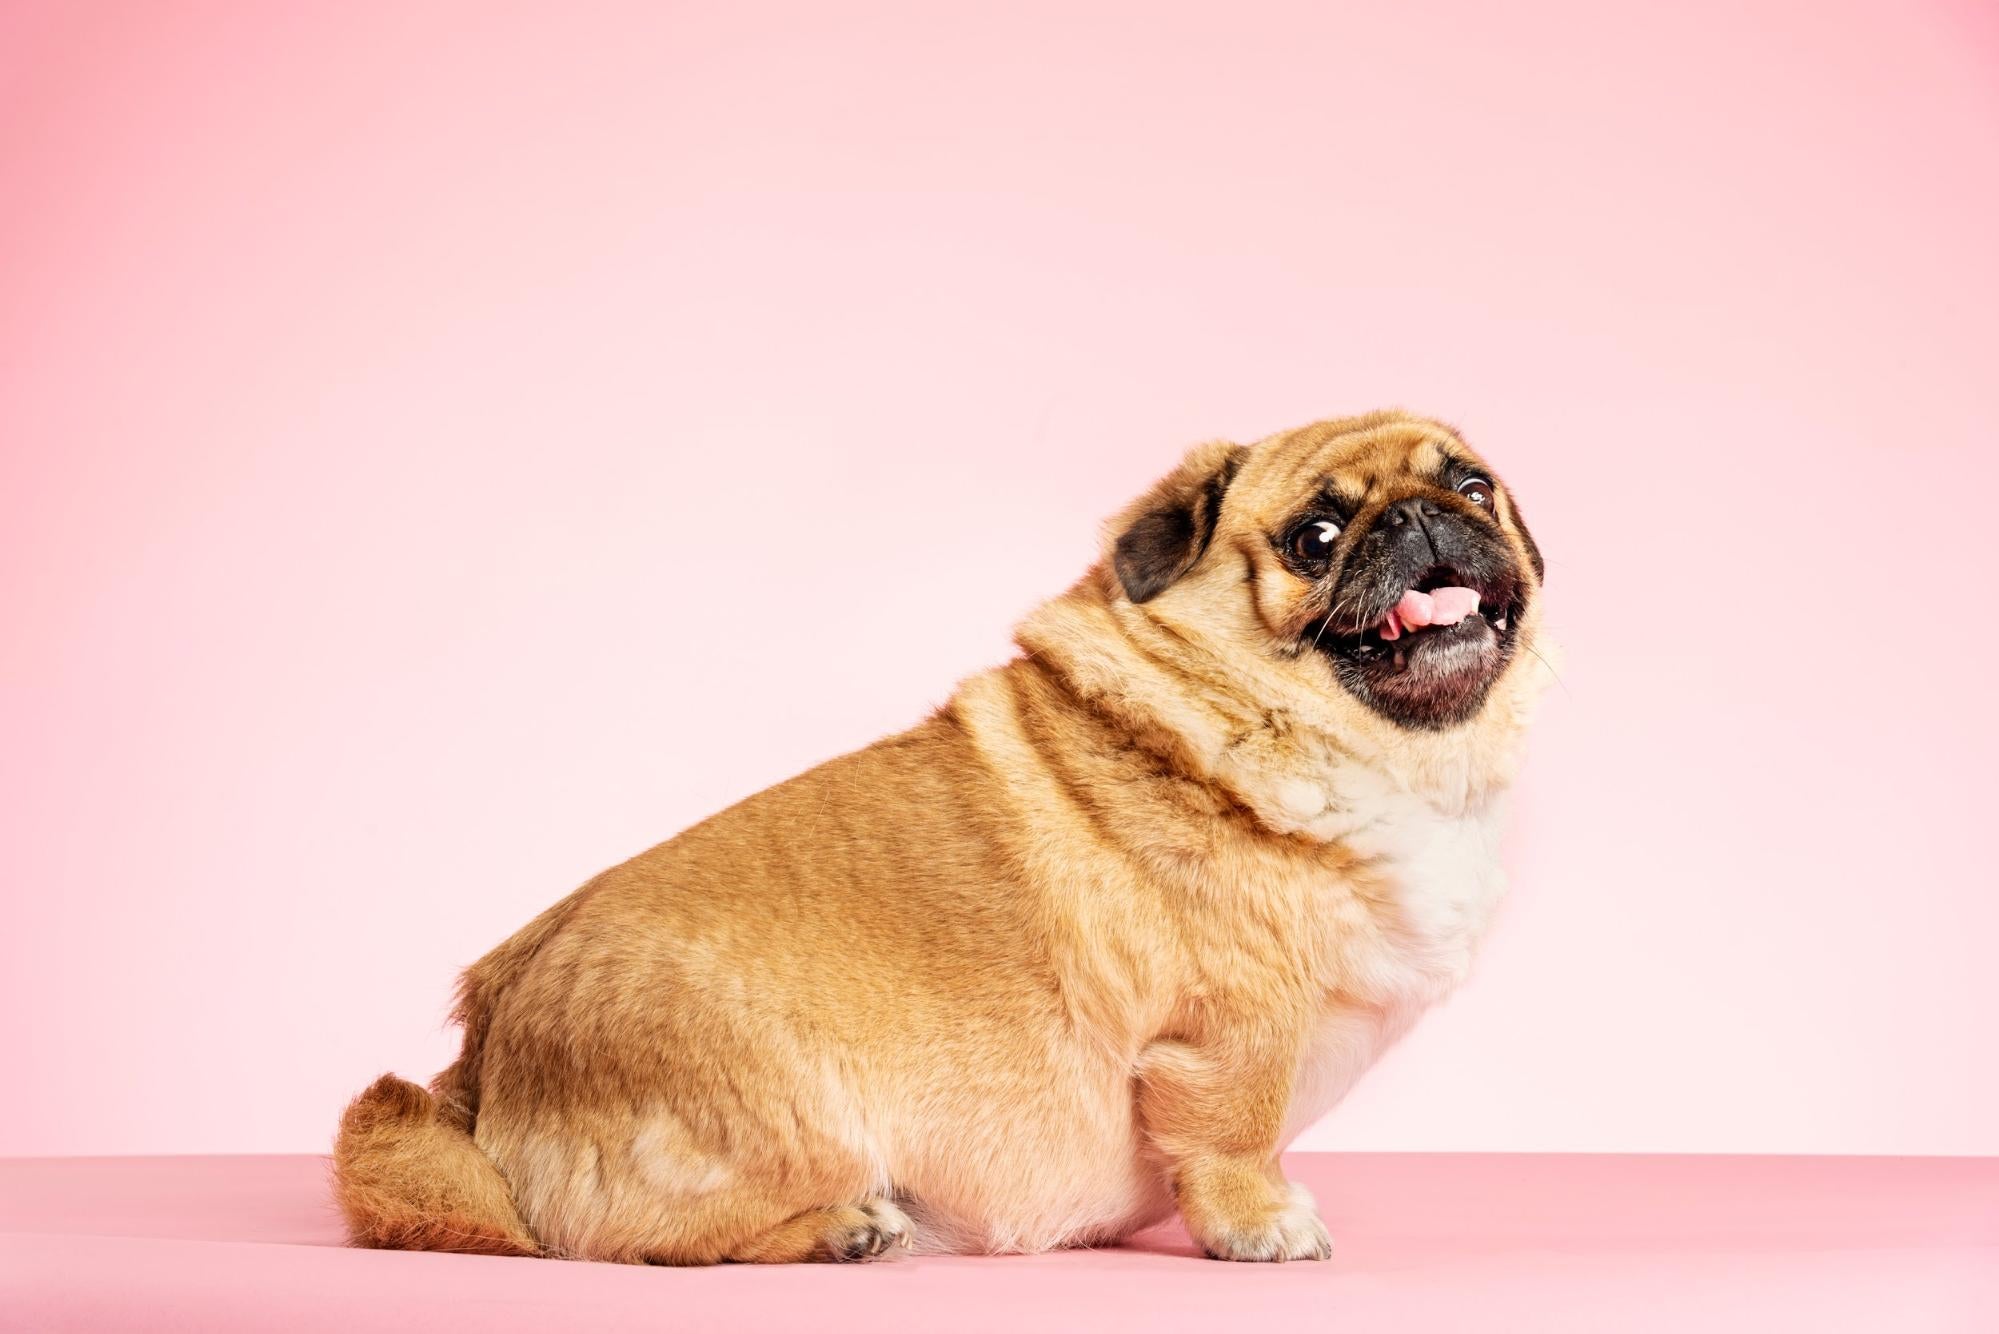 Weight Management in Dogs: Choosing Low-Fat Treats